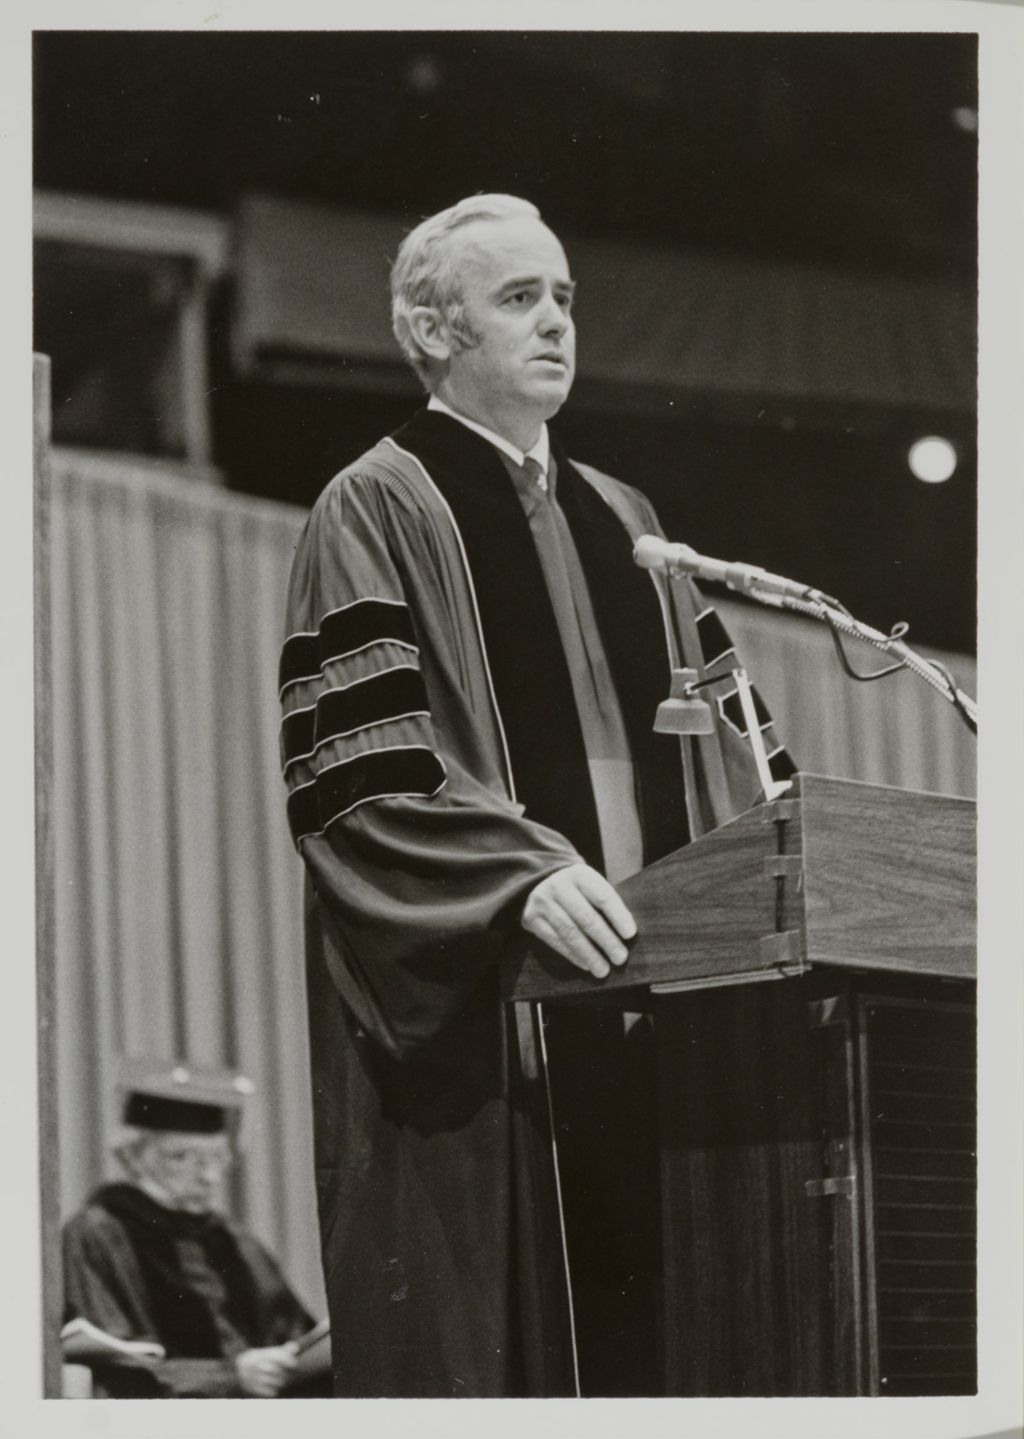 Miniature of William D. Forsyth, Jr. addressing the audience at the graduation ceremony